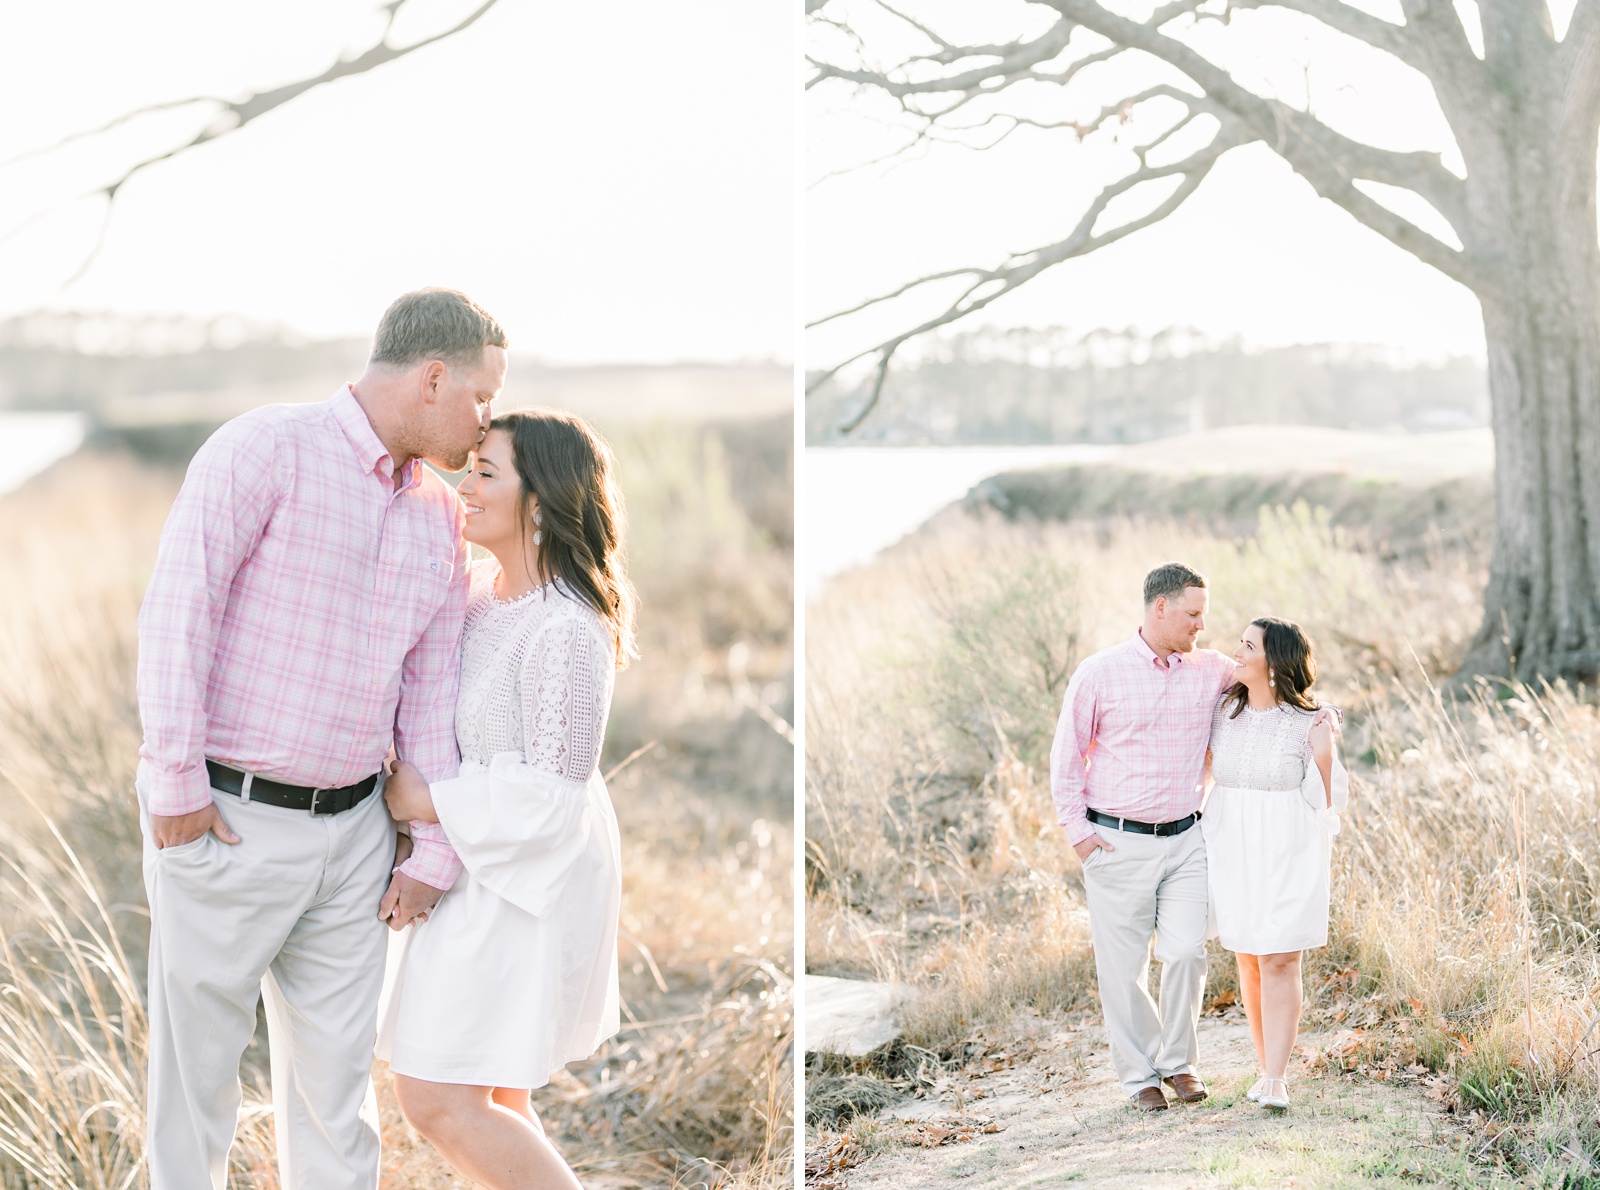 Indian Creek Yacht & Country Club wedding engagement session in Kilmarnock Virginia. Beautiful golden light and spring foliage!